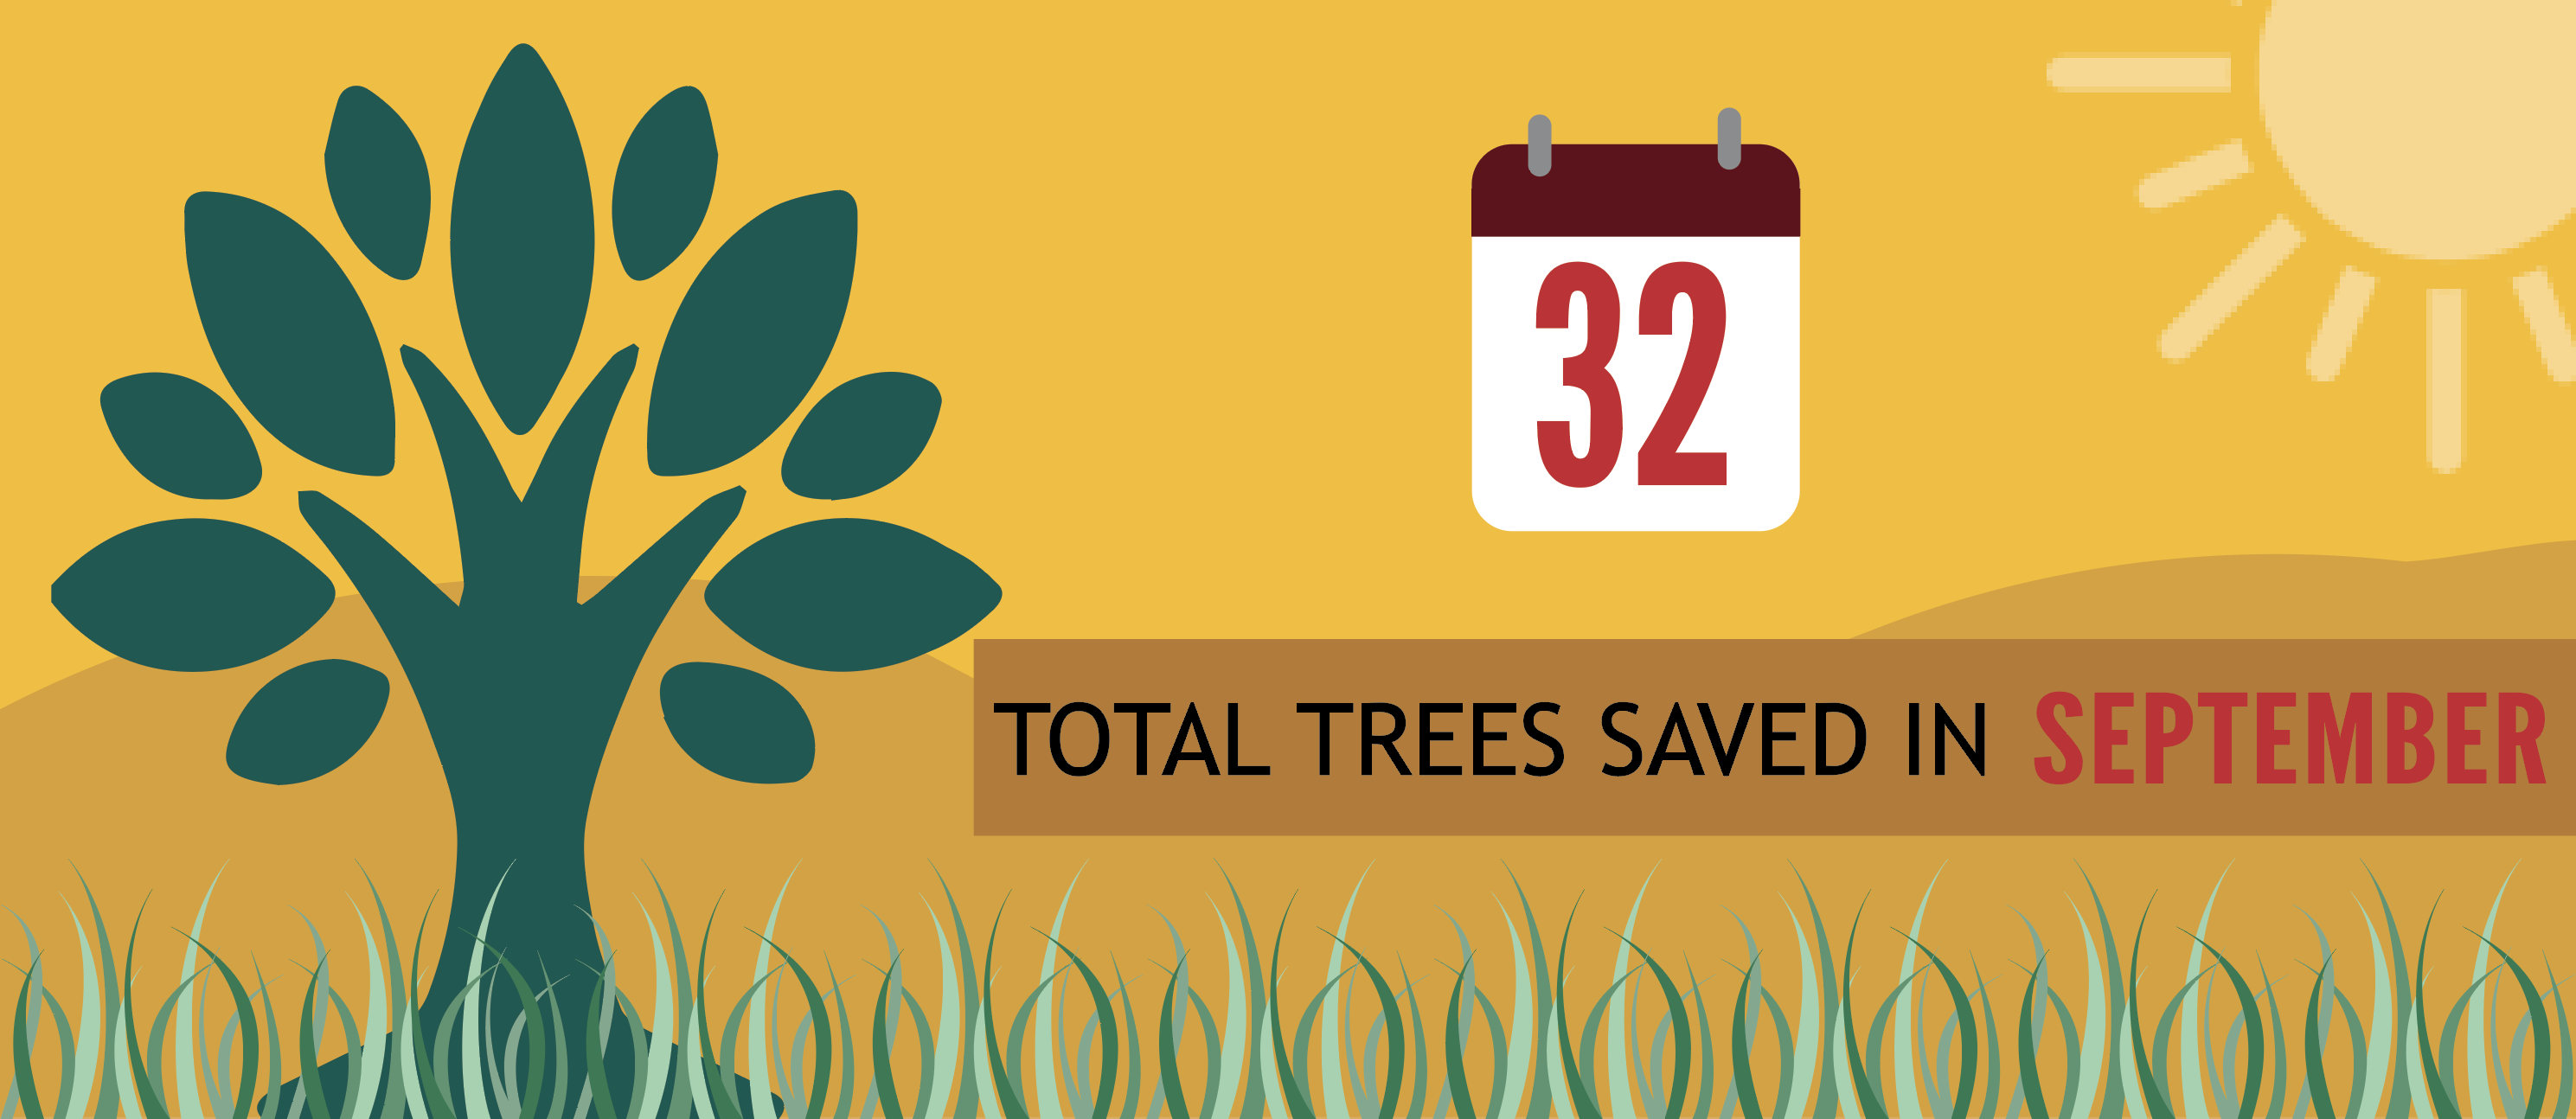 trees-saved-sept-banner.png